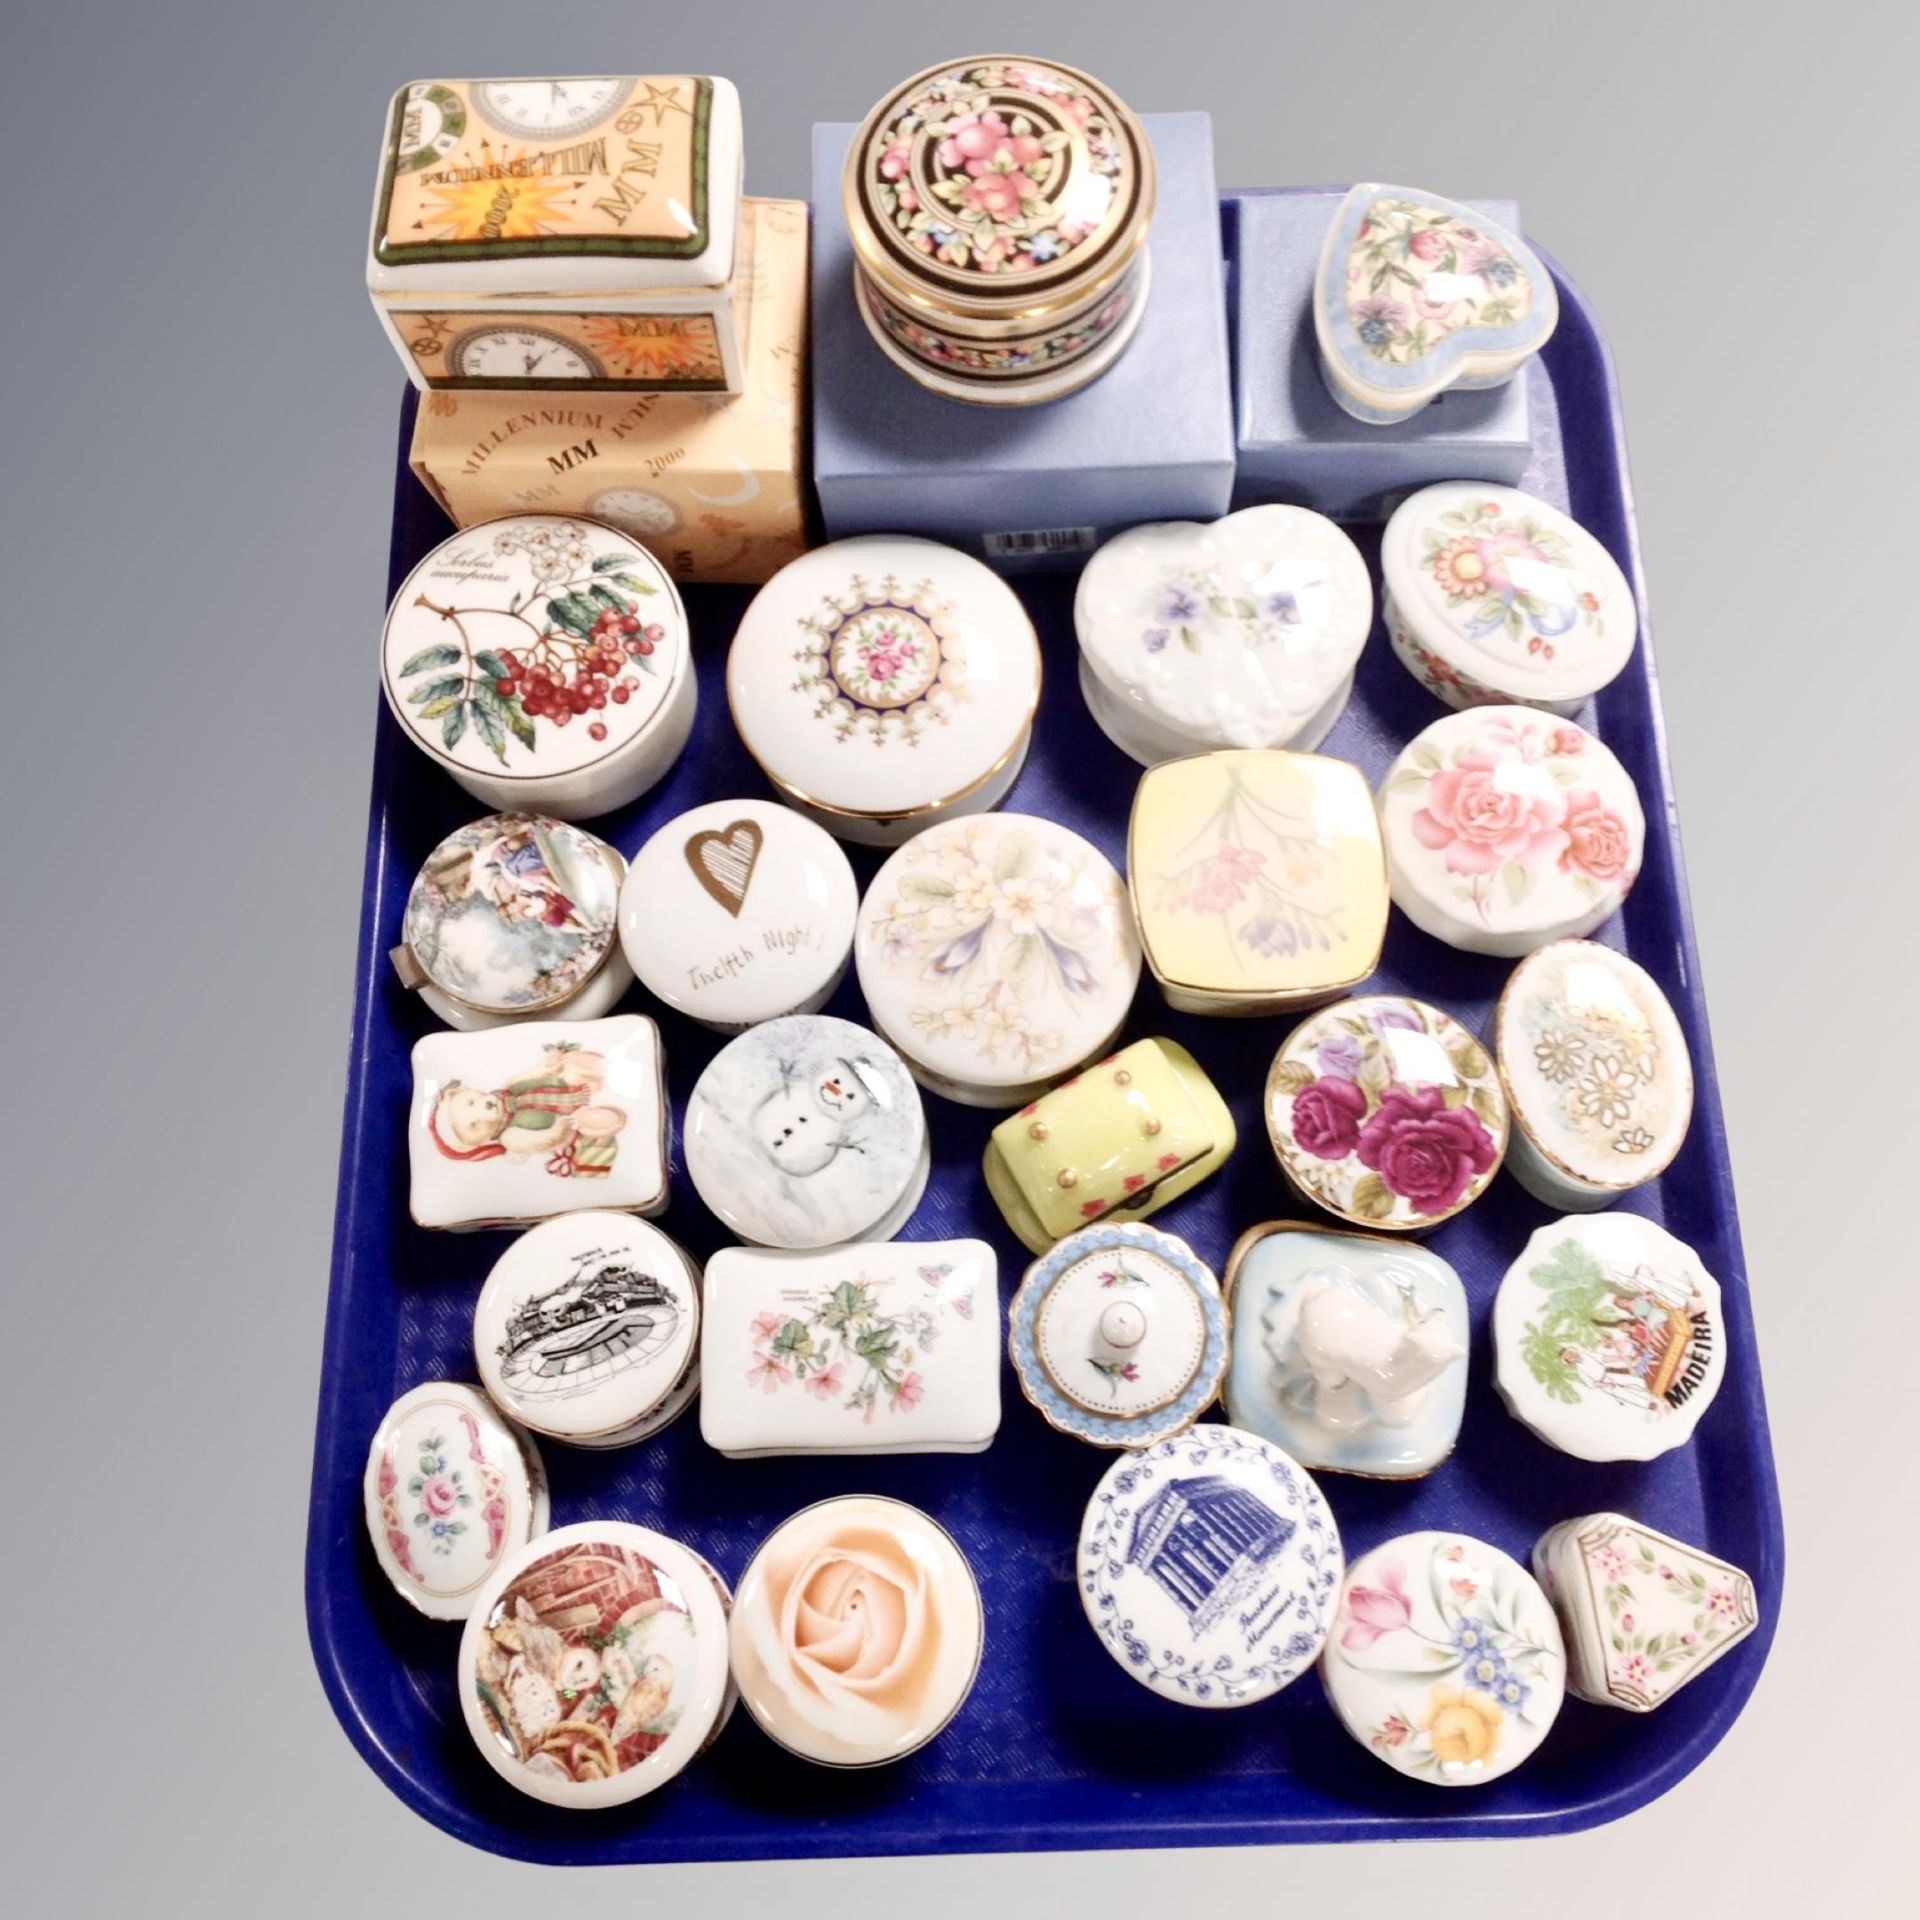 A tray of quantity of ceramic lidded trinket pots, Wedgwood, Rothschild collection,